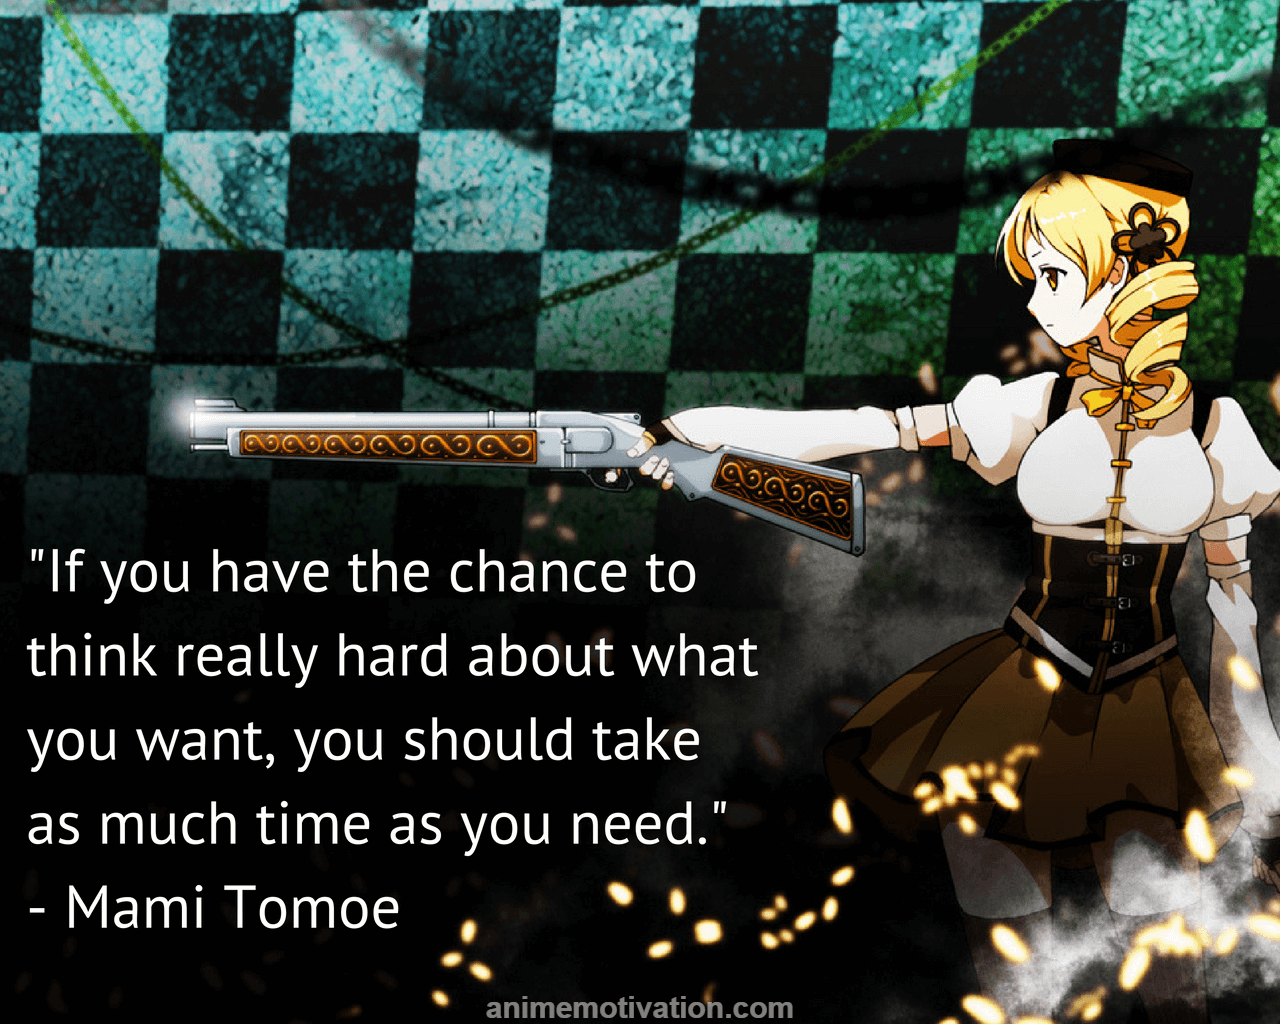 11 Motivational Anime Quotes that Inspire You